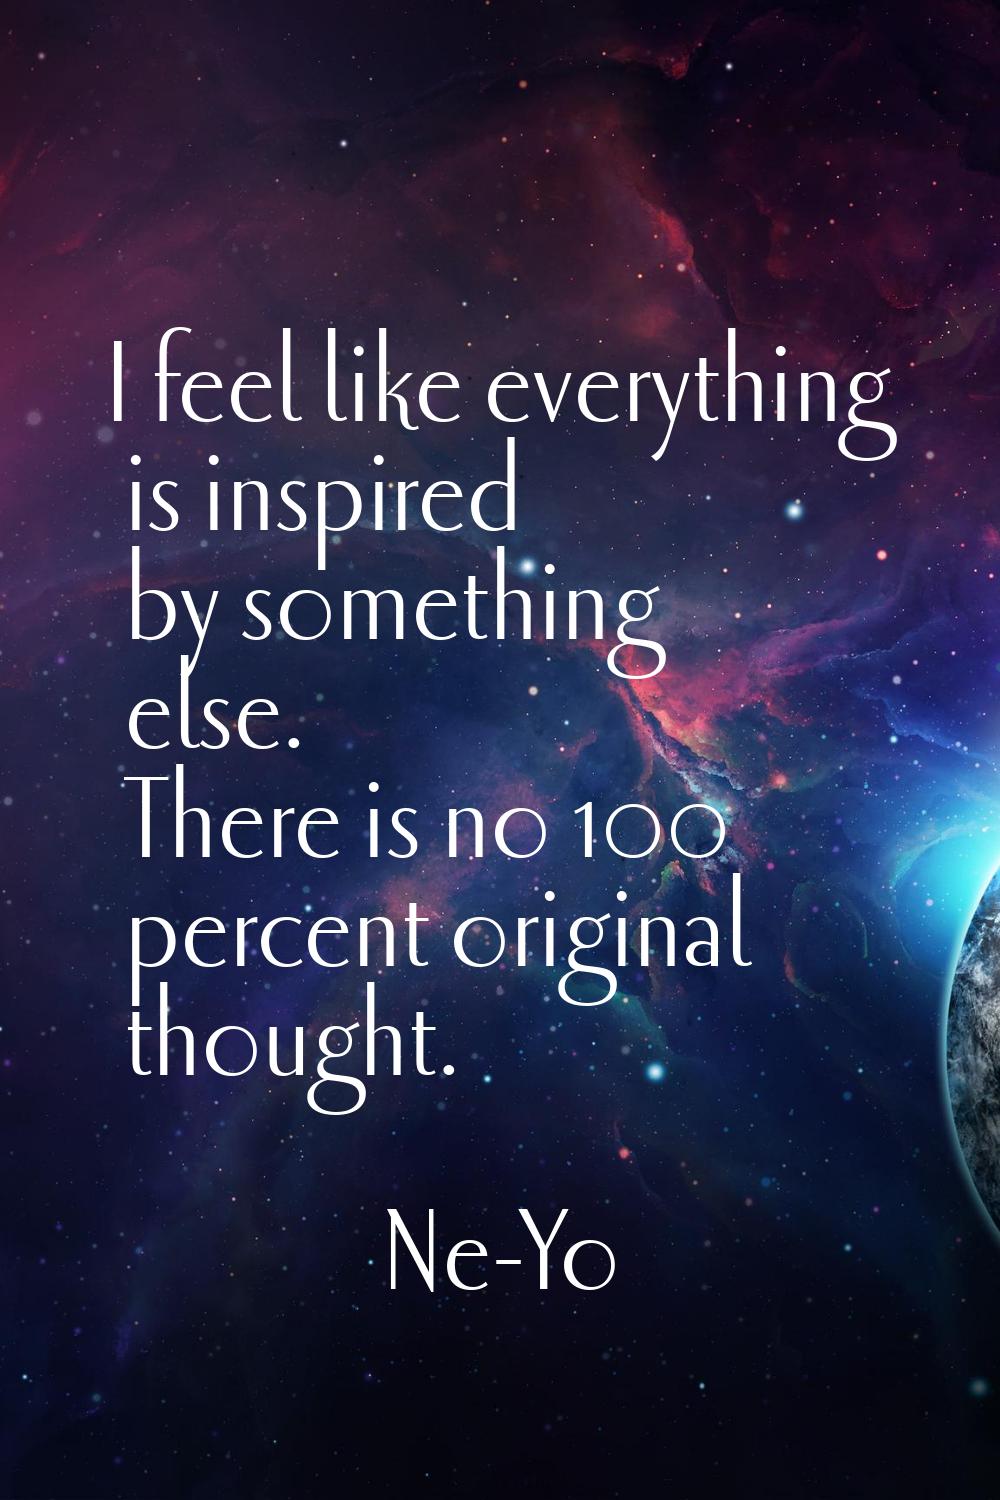 I feel like everything is inspired by something else. There is no 100 percent original thought.